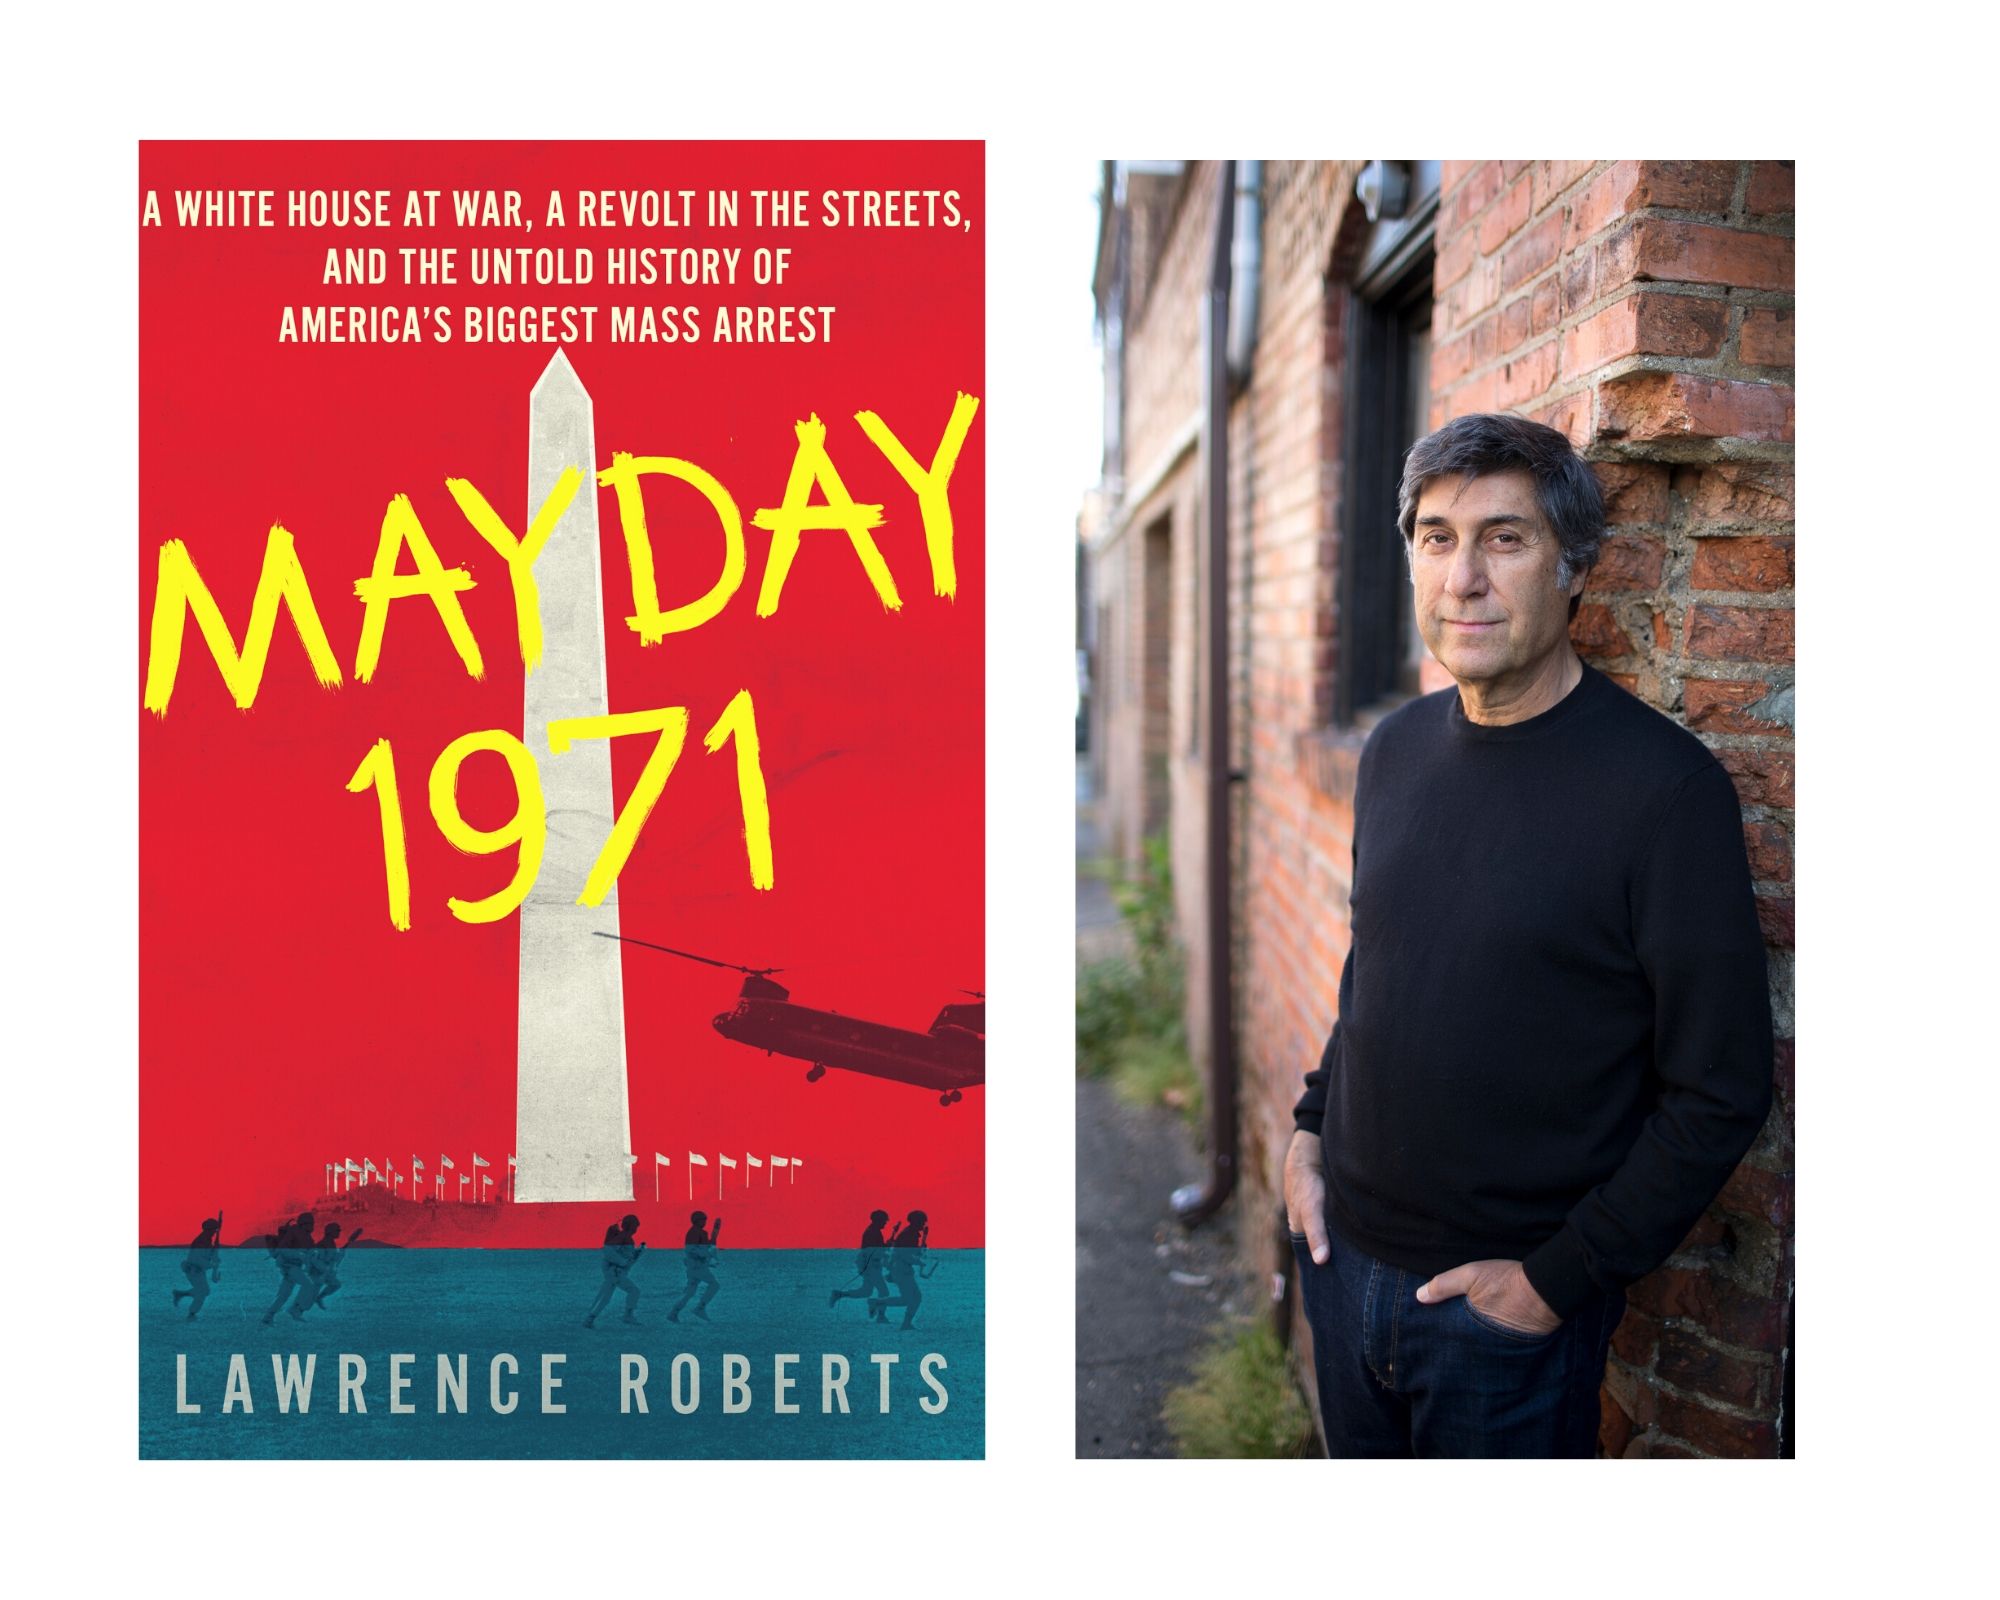 Red book cover with yellow lettering and washington monument standing upright in the middle of it. Image of writer wearing black clothes and leaning on a red brick wall.